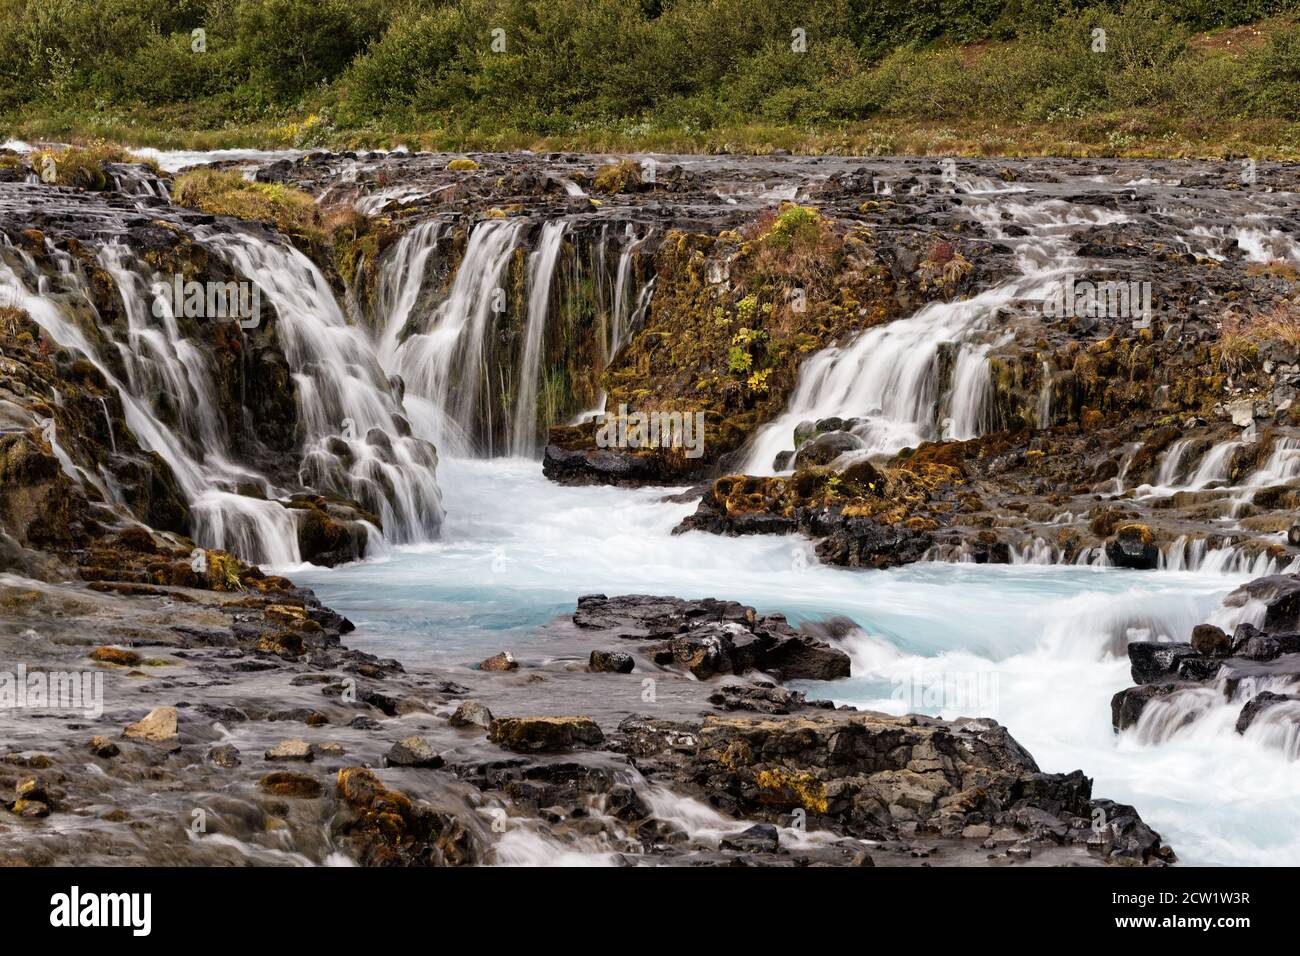 Scenic view of a wild waterfall with many individual watercourses at a rock stage in the evening light, close up - Location: Iceland, Golden circle, B Stock Photo